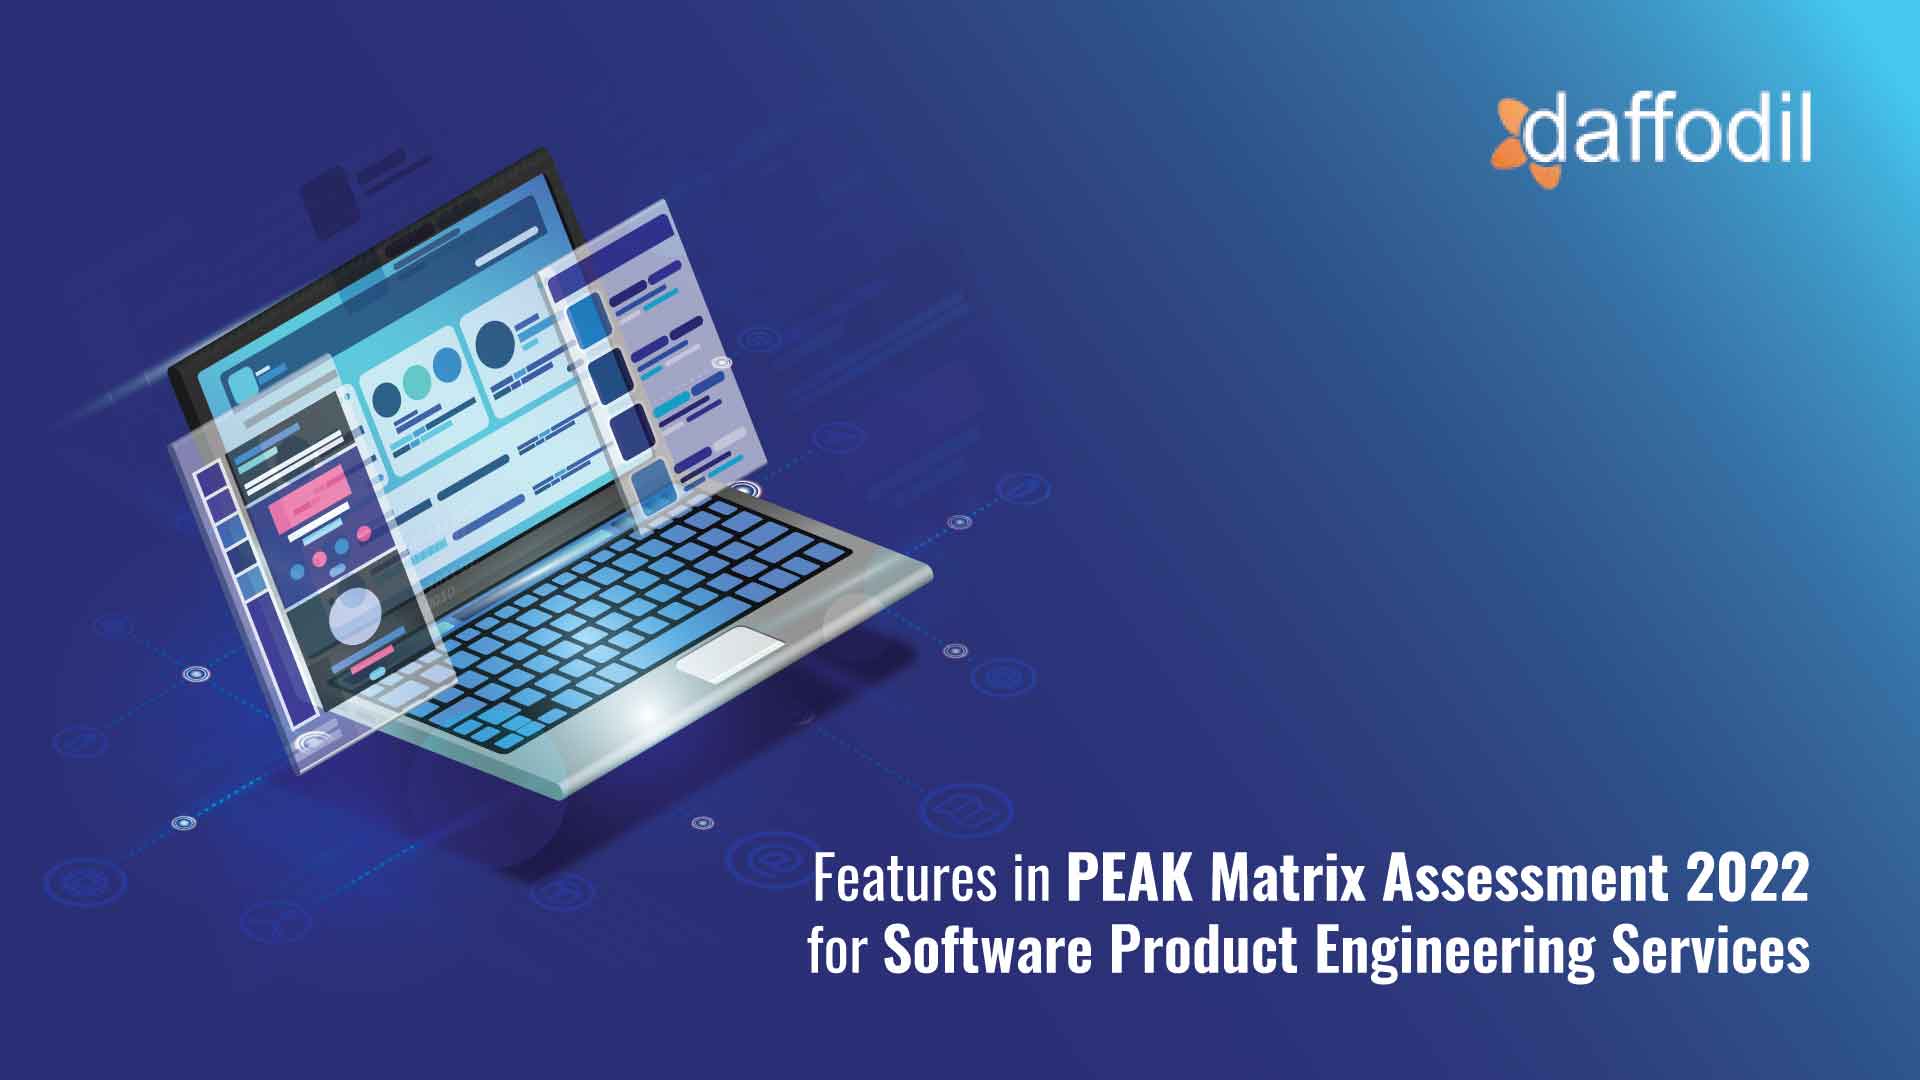 Daffodil Software features in PEAK Matrix Assessment 2022 for Software Product Engineering Services